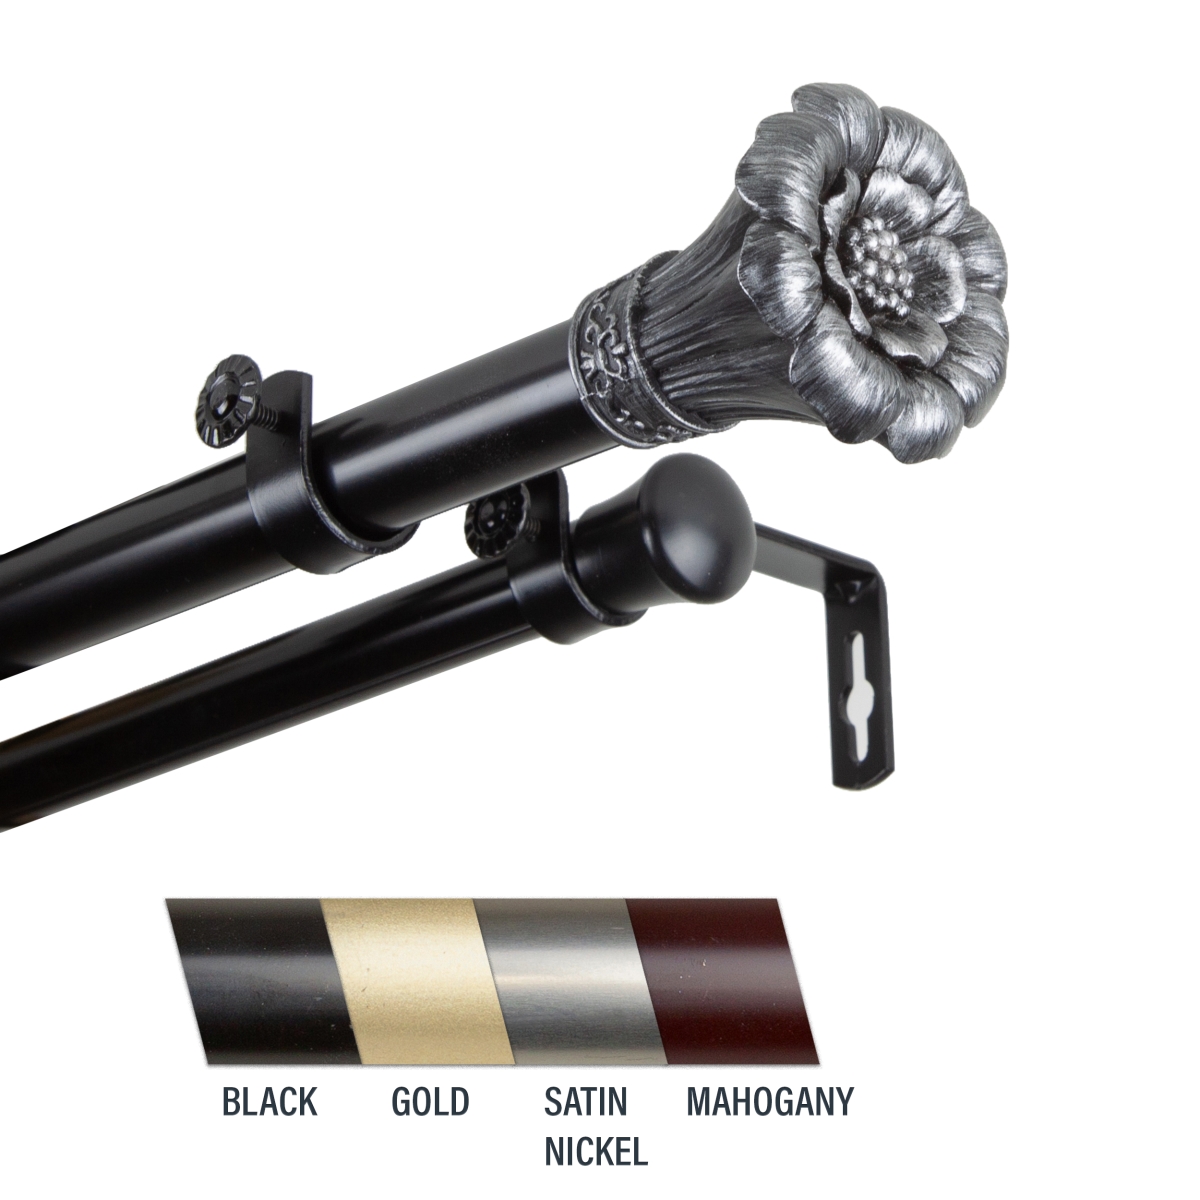 100-02-1602-d Flora 1 In. Double Curtain Rod, 160-240 In. - Black